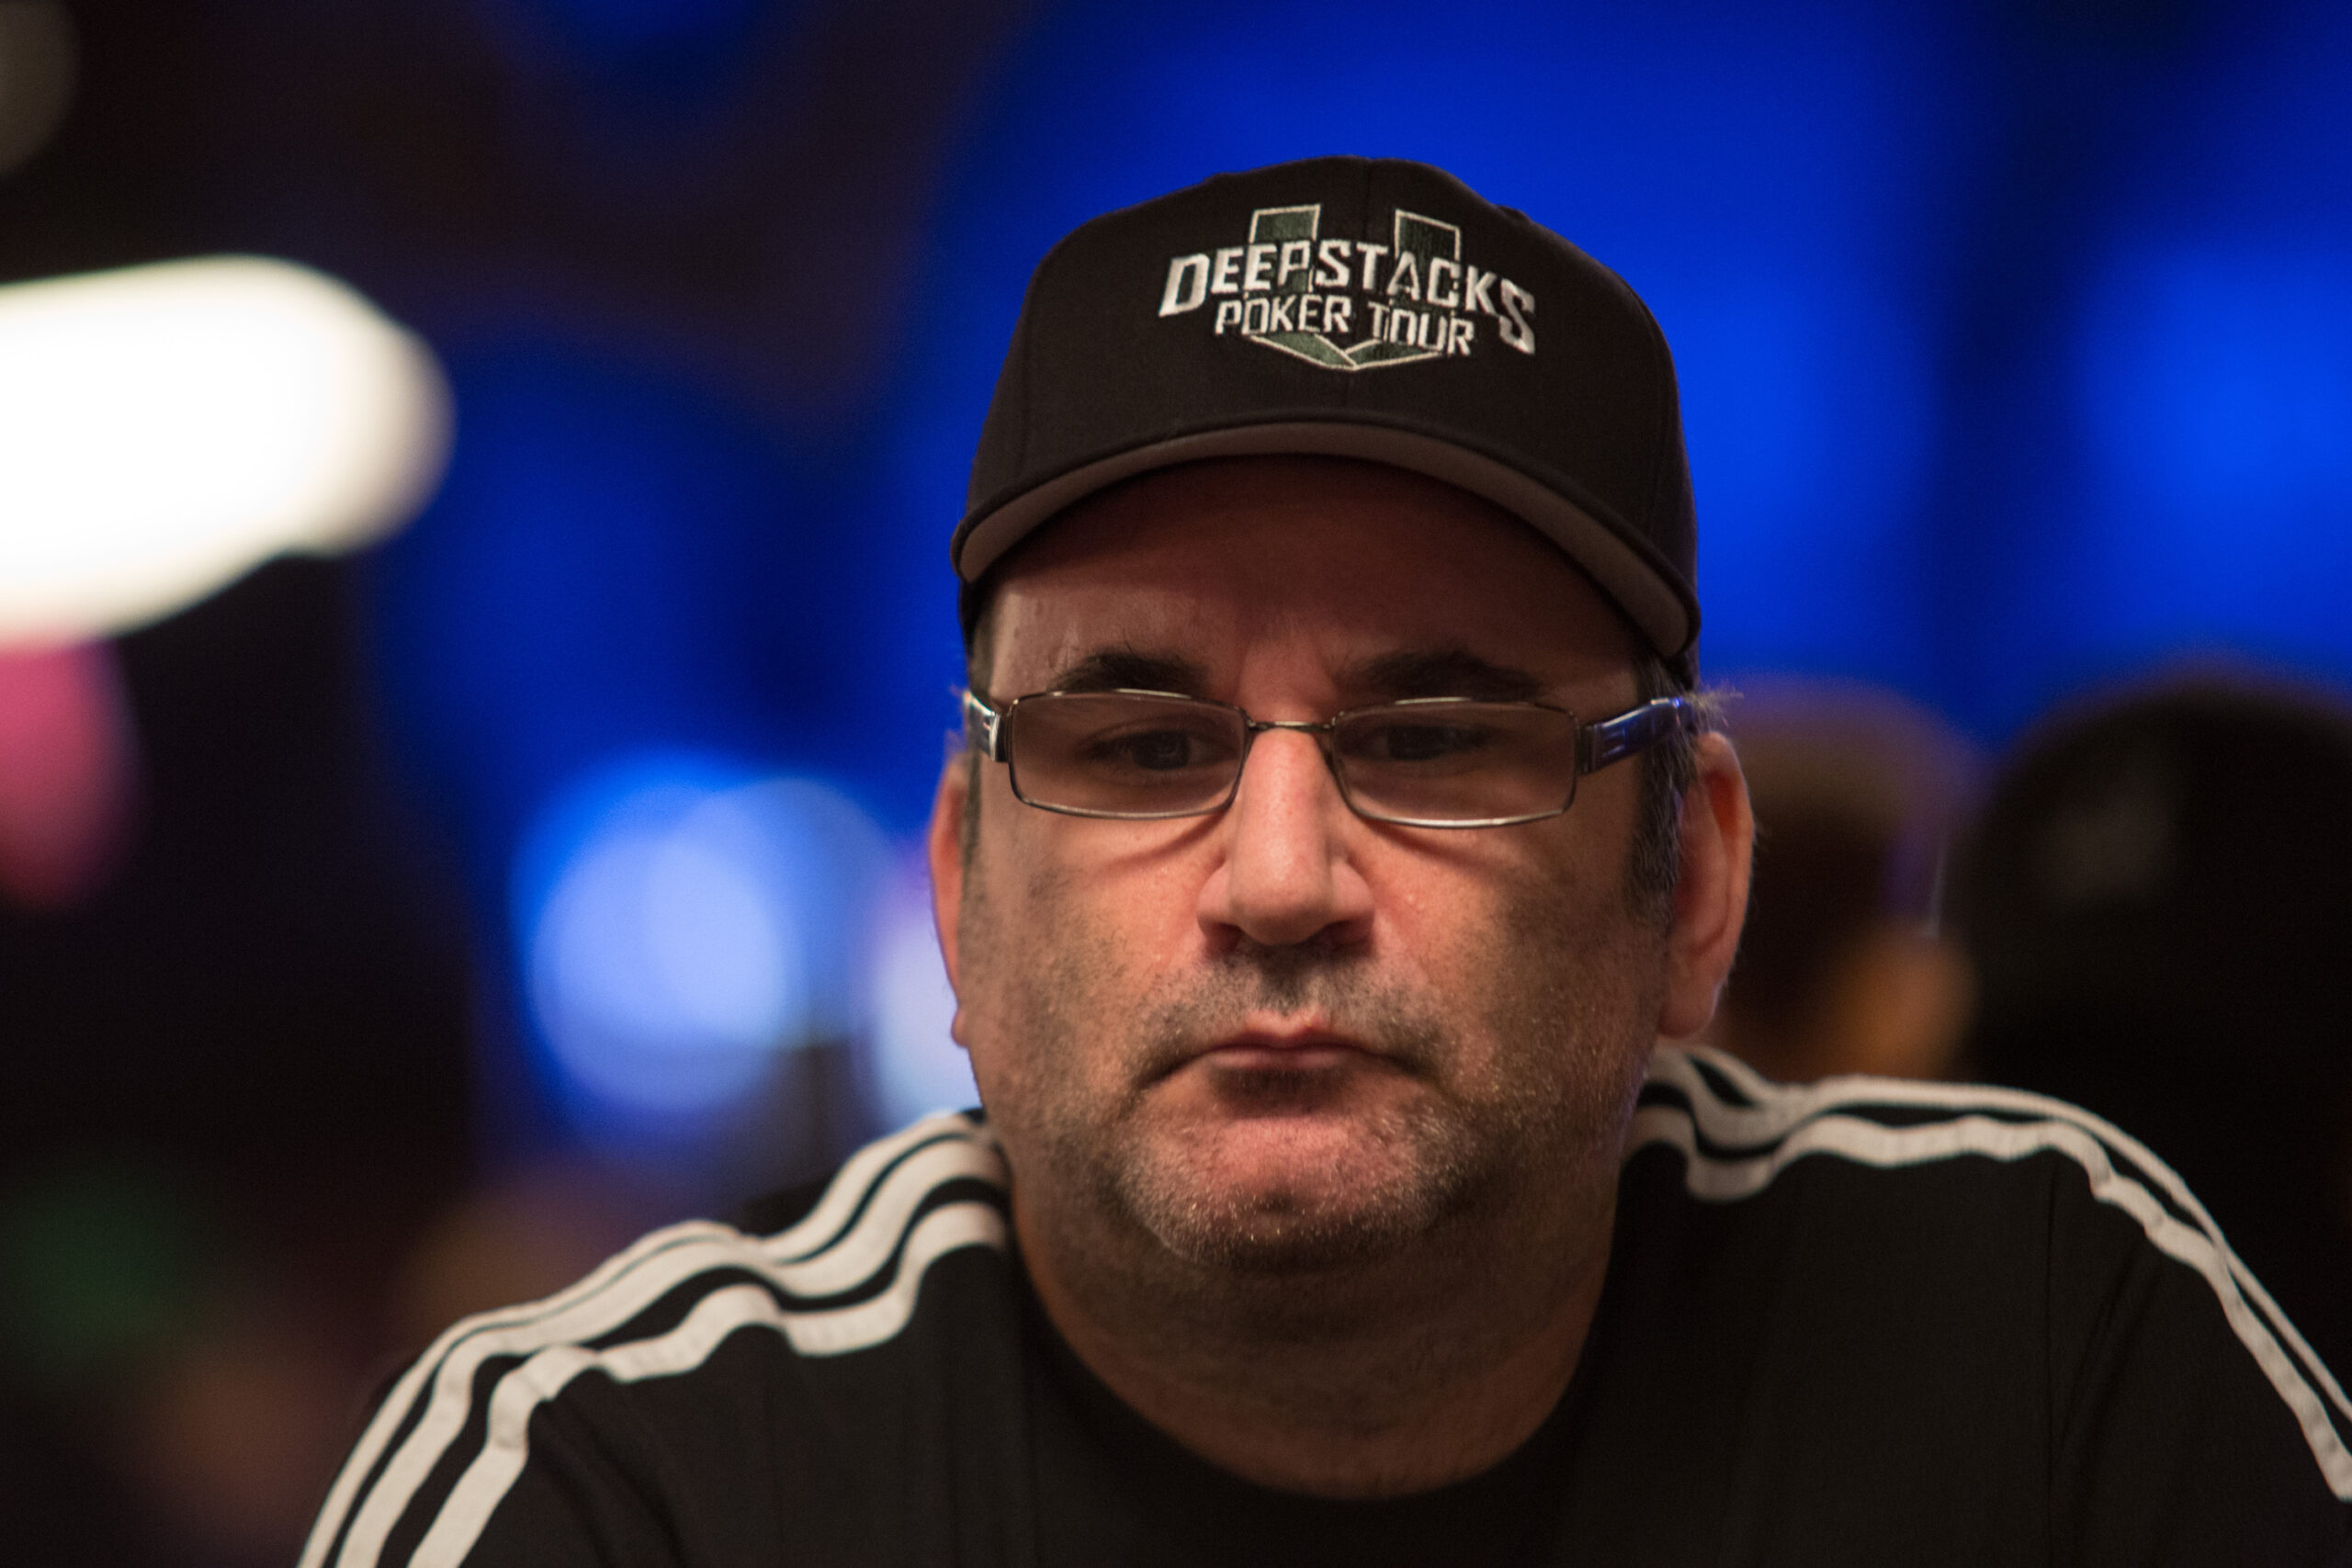 Mike Matusow Claims Donald Trump Sexual Assault Victims Are Lying, Provides No Proof